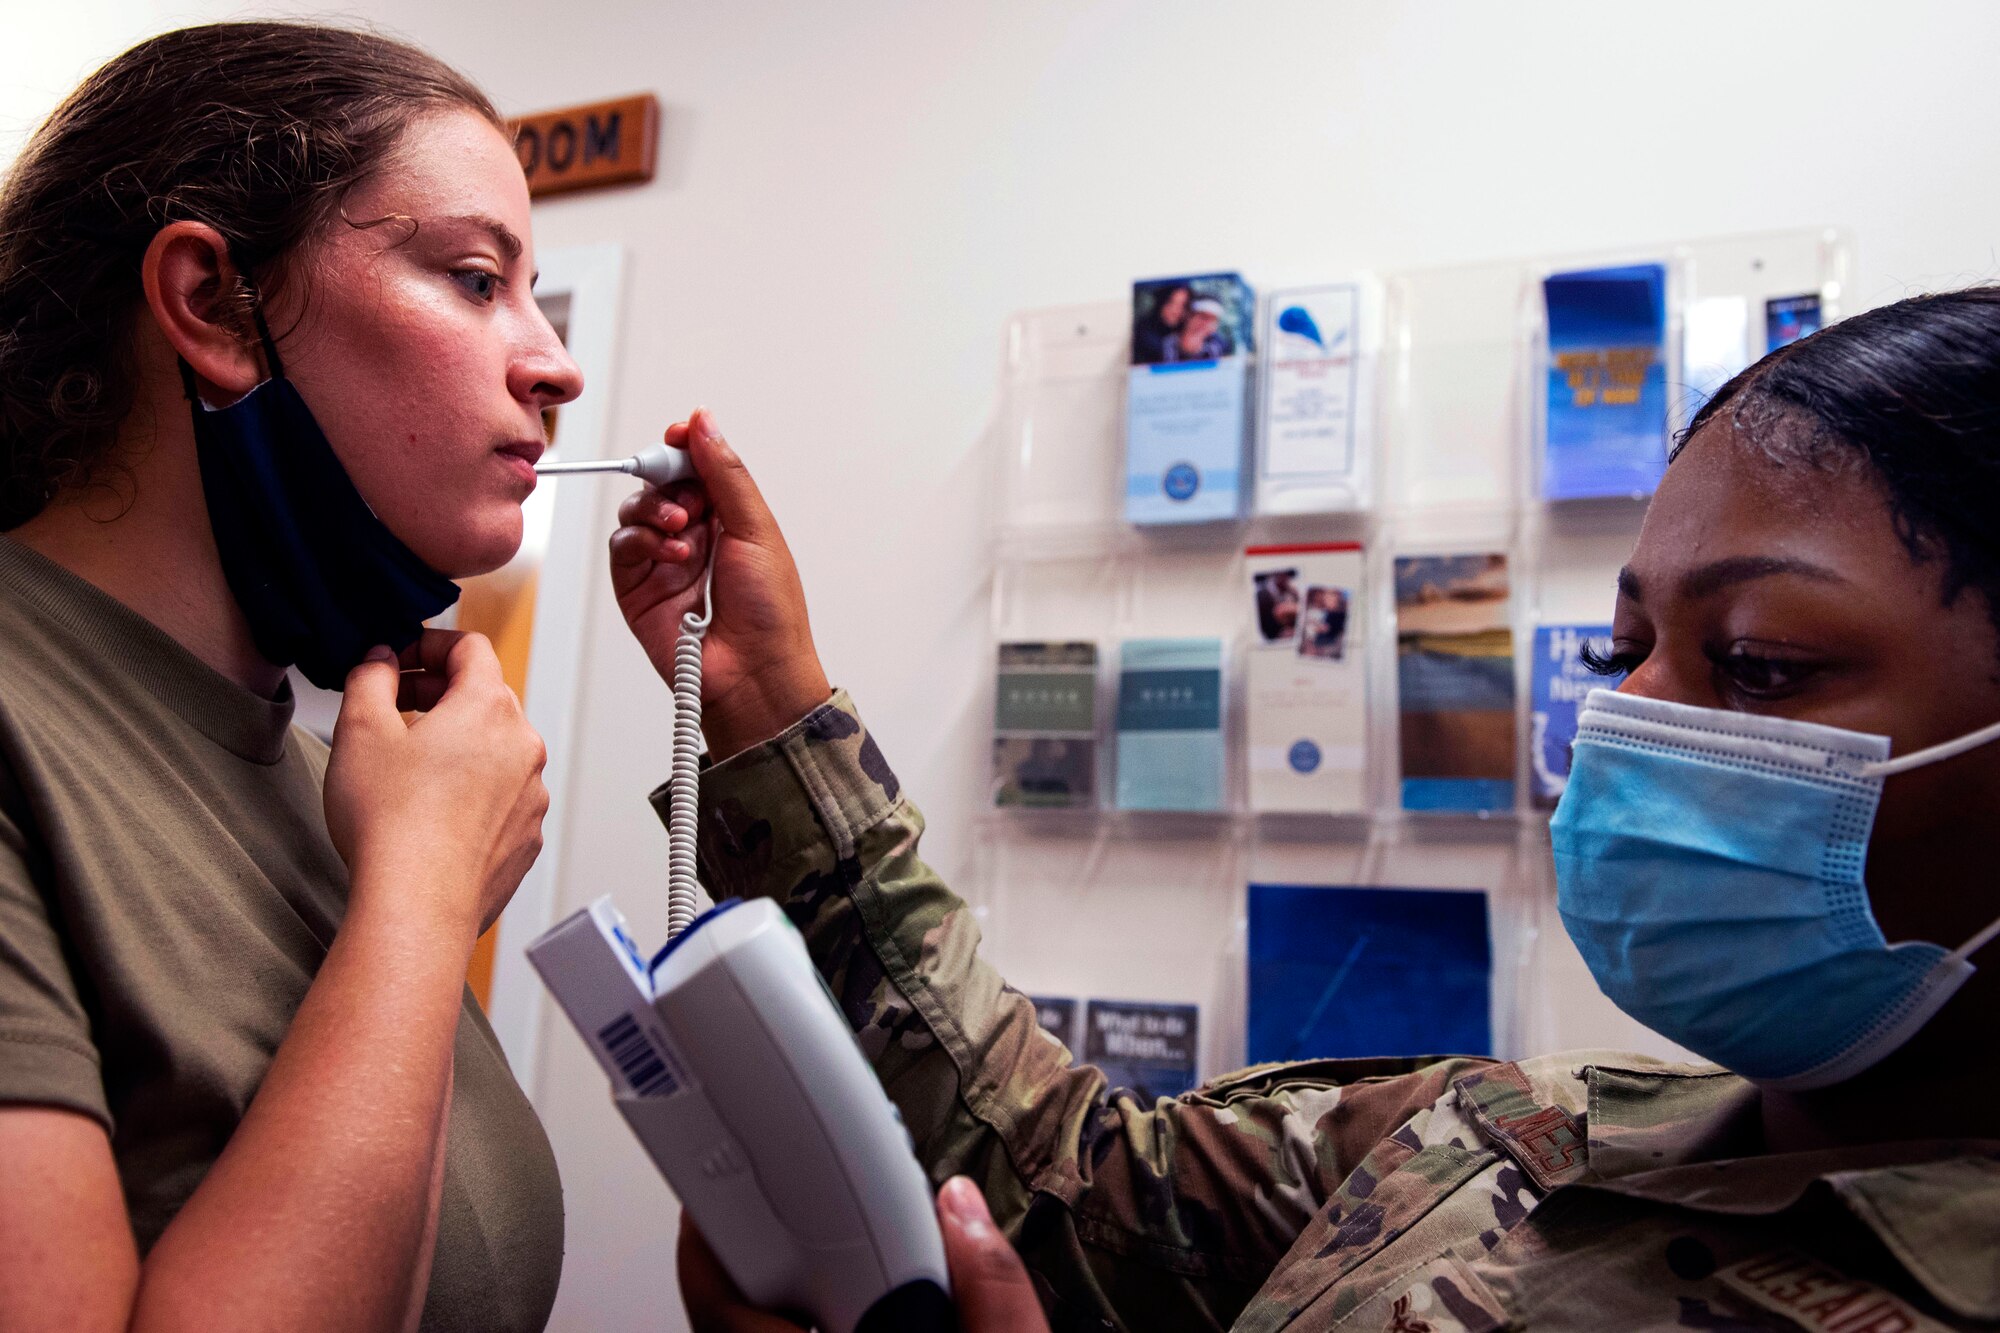 A female airman wearing a face mask takes the temperature of another  female airman, who has pulled her face mask down under her chin.